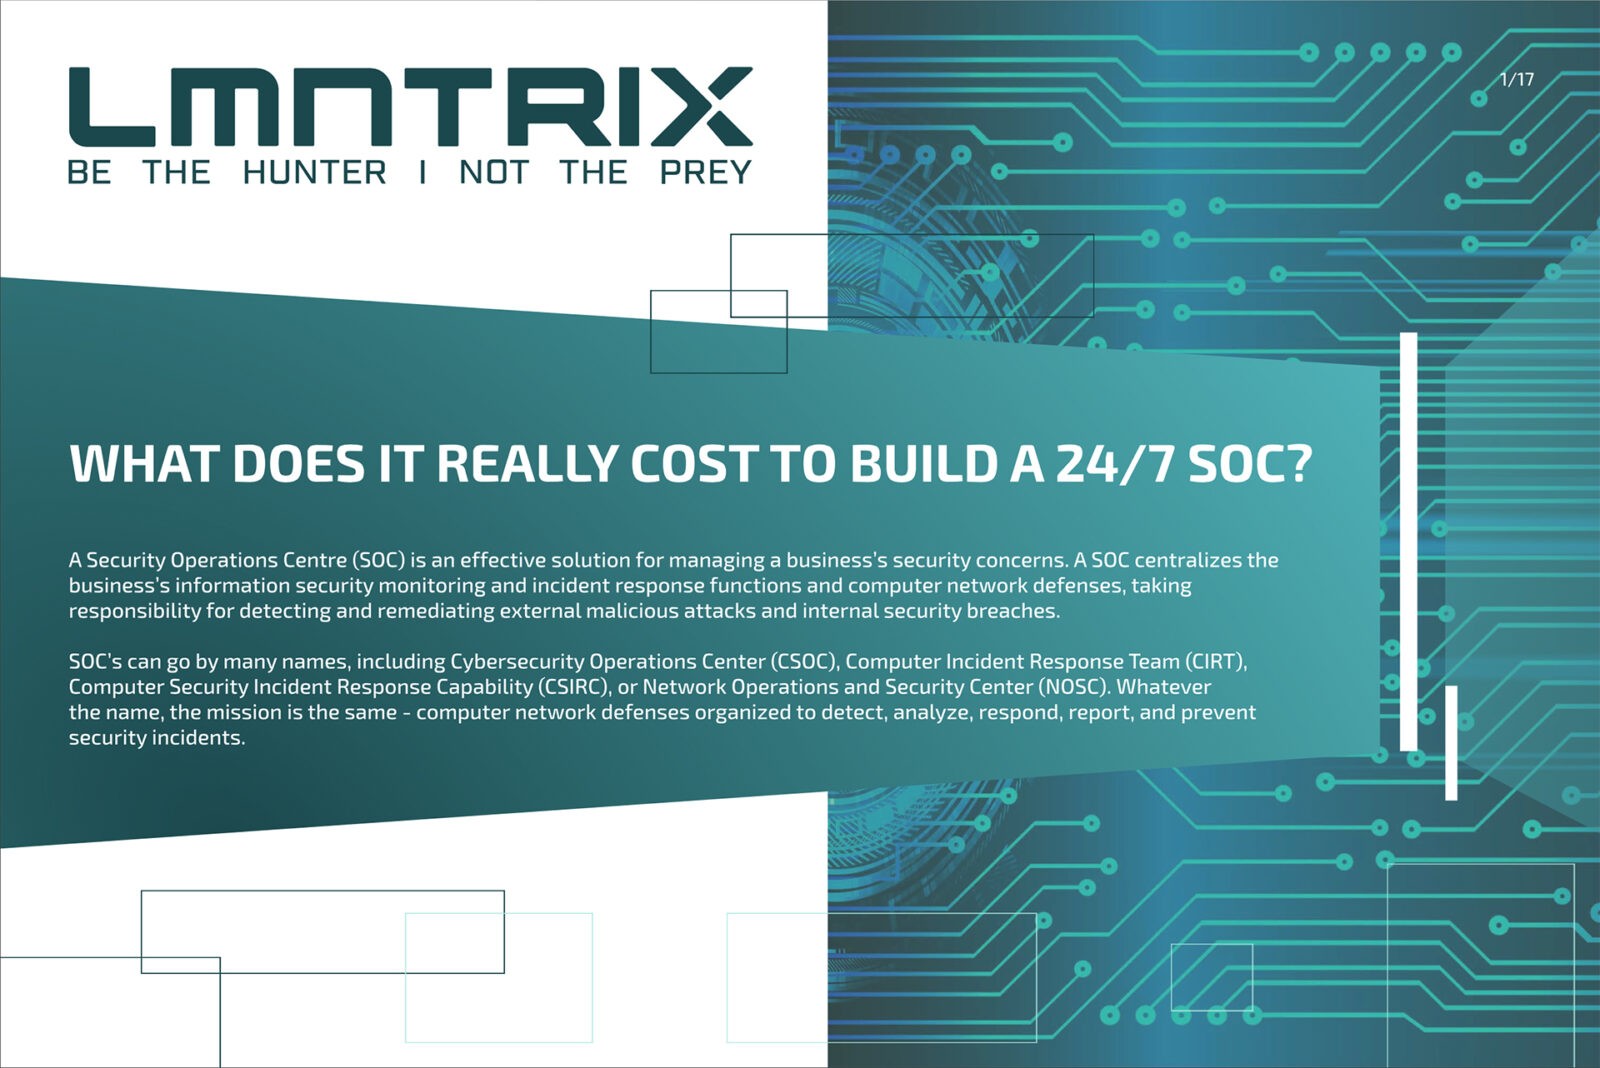 What Does It Really Cost to Build a 24/7 SOC?